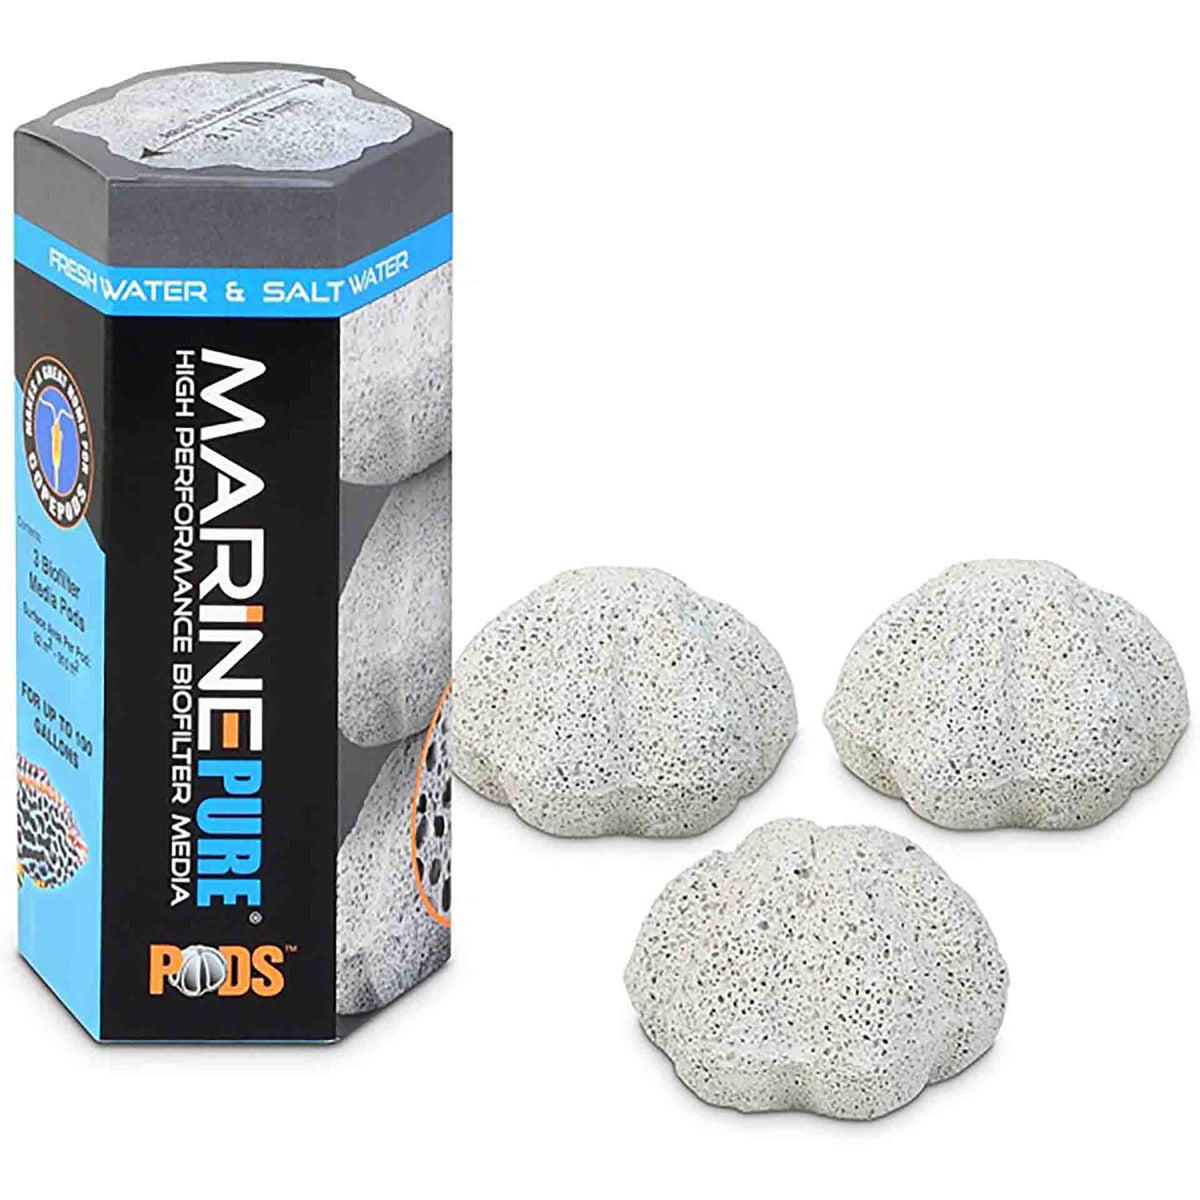 MarinePure Pods - 24 Pack - Treats up to 370l